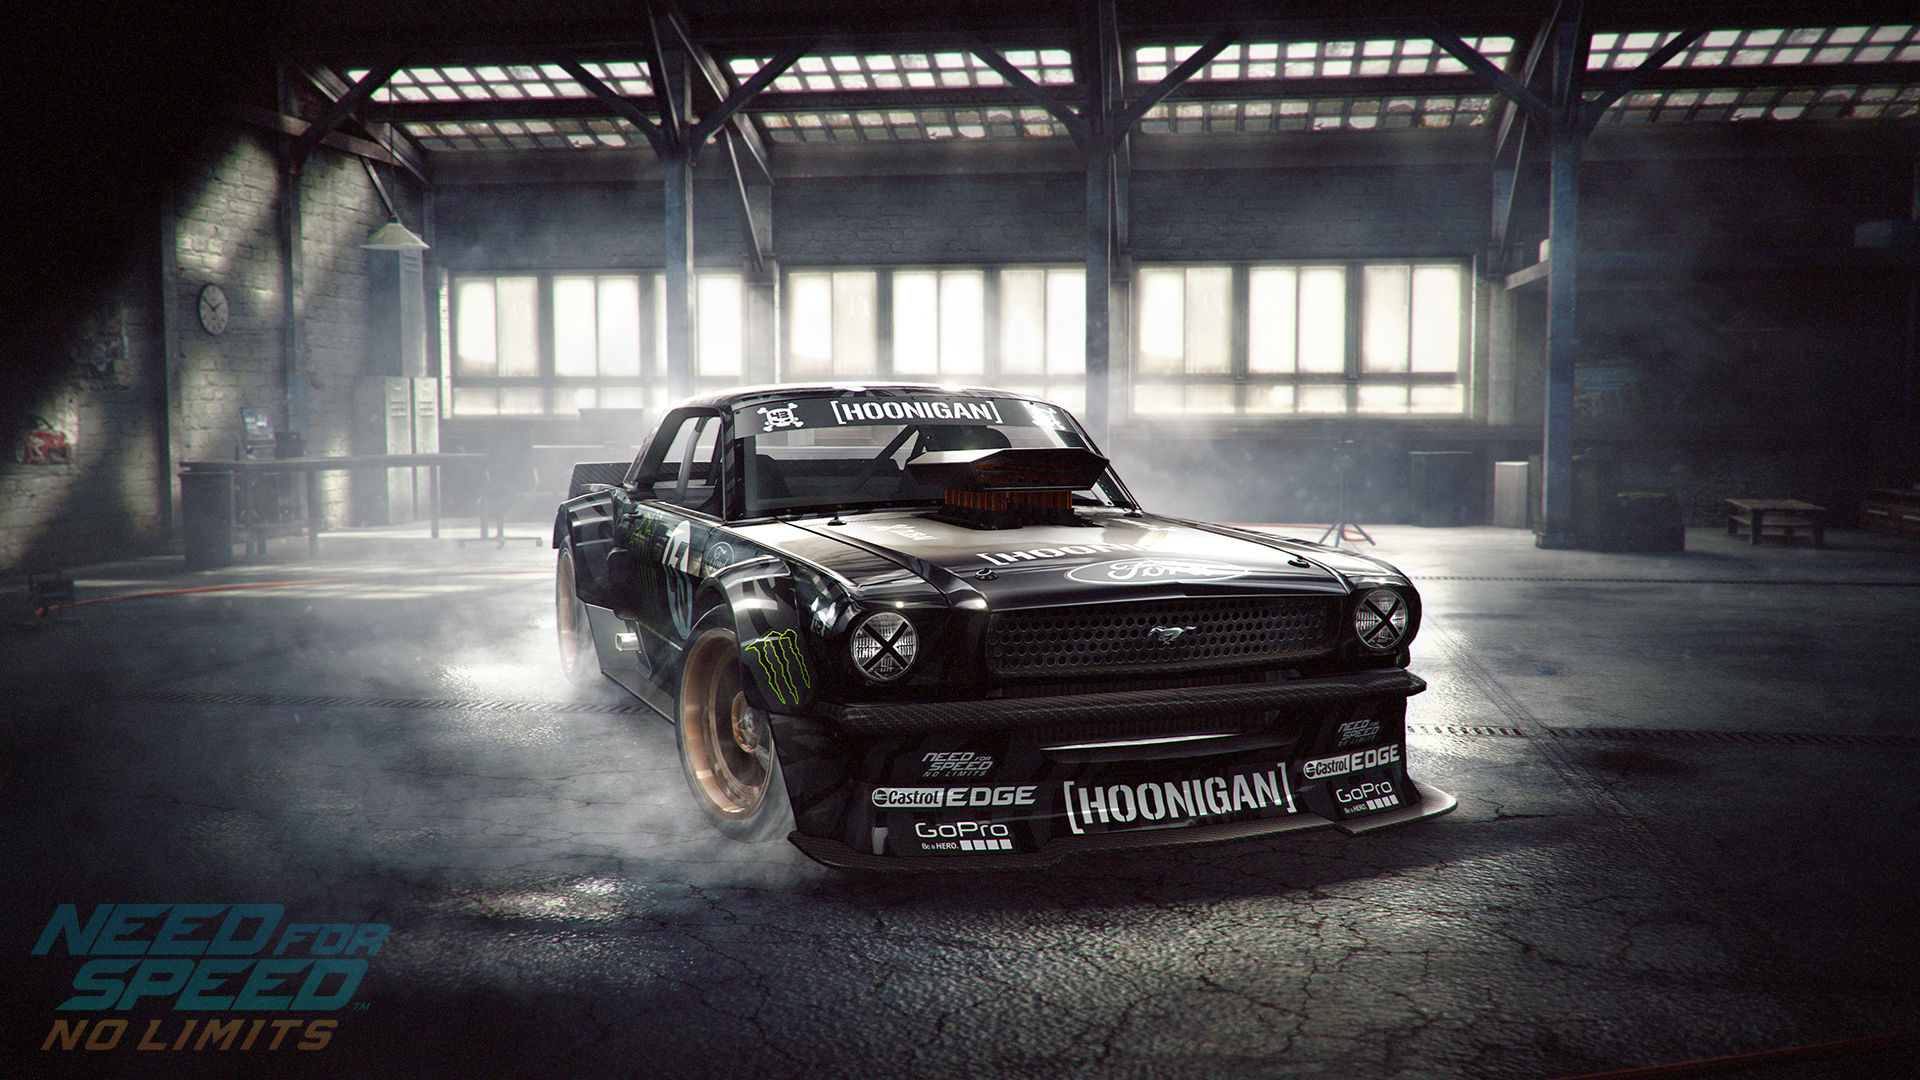 Vaz 2106 Hoonicorn  4K wallpapers free and easy to download